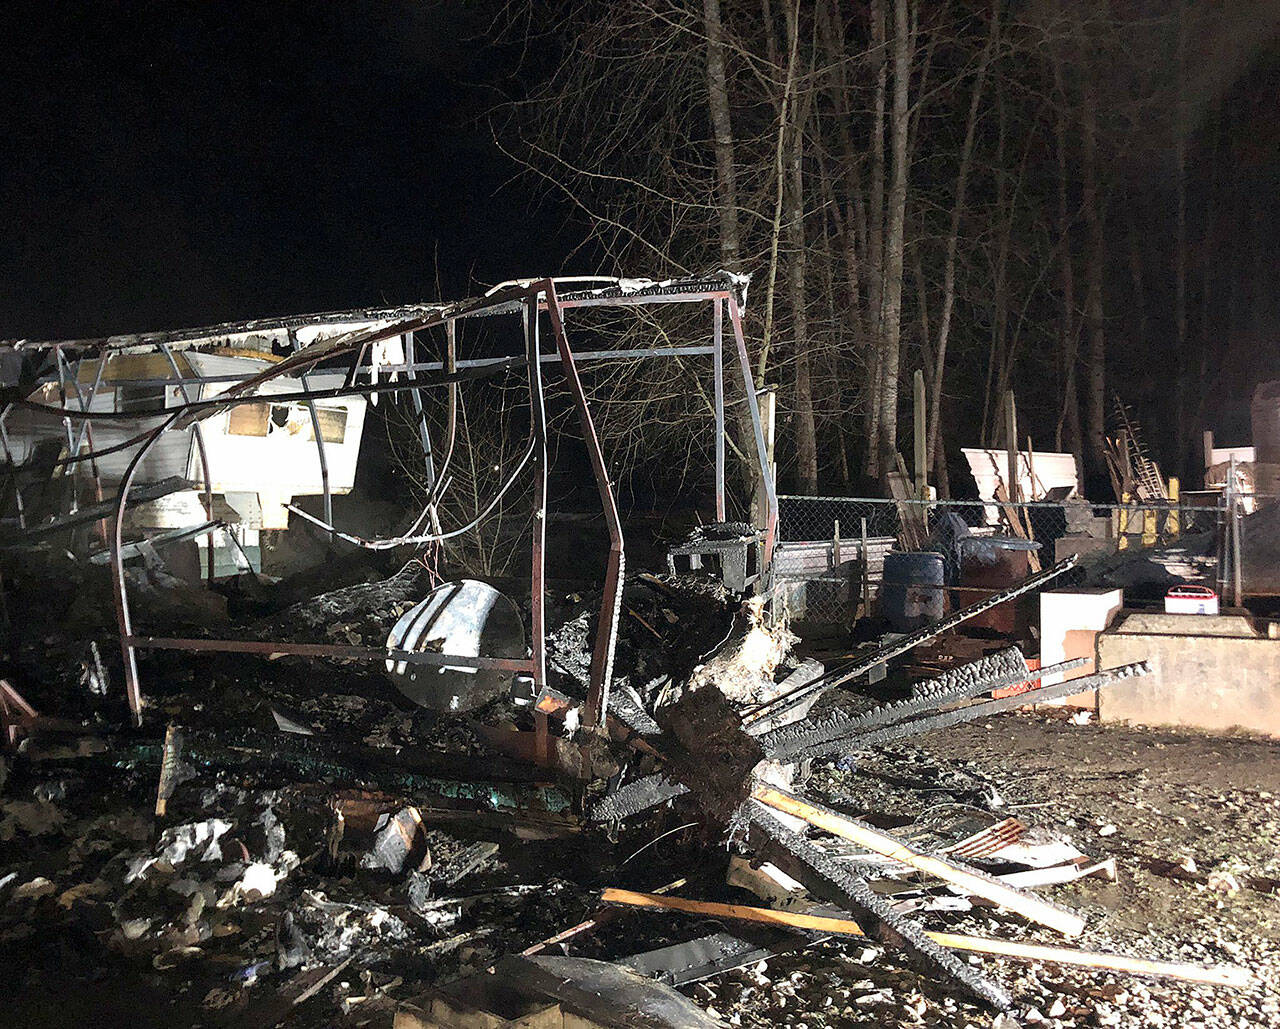 A man was injured and a woman, now identified as 53-year-old Jackie Stetcher, was found dead after an RV fire on Jan. 29 in Marysville. (Marysville Fire District)